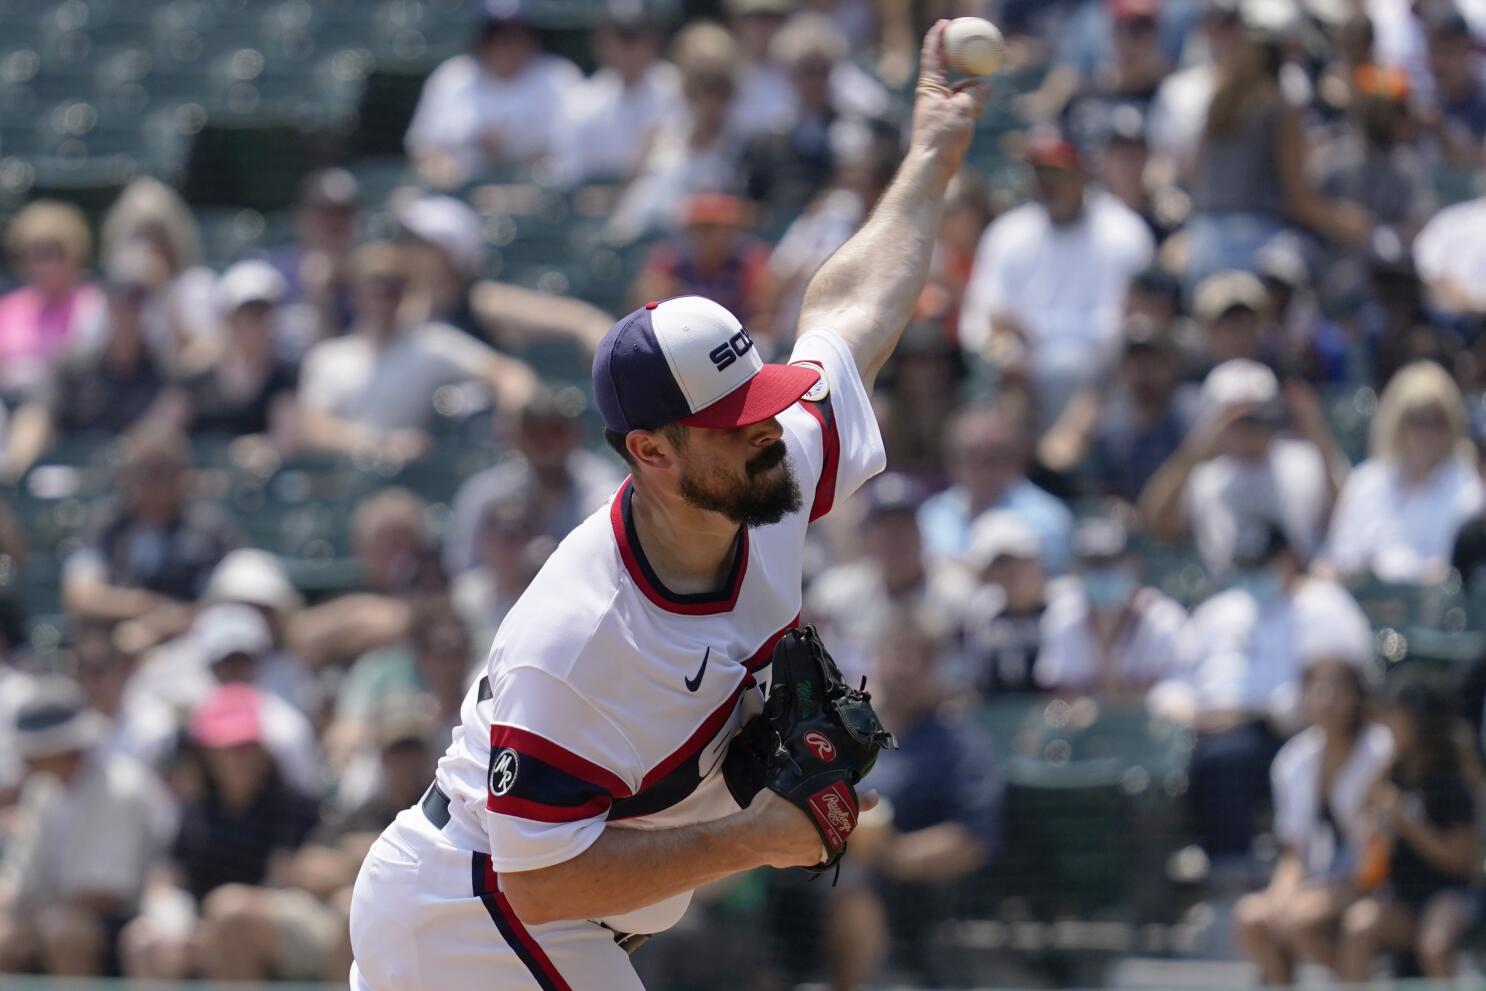 Two effective starters, but White Sox's Carlos Rodon bests Twins